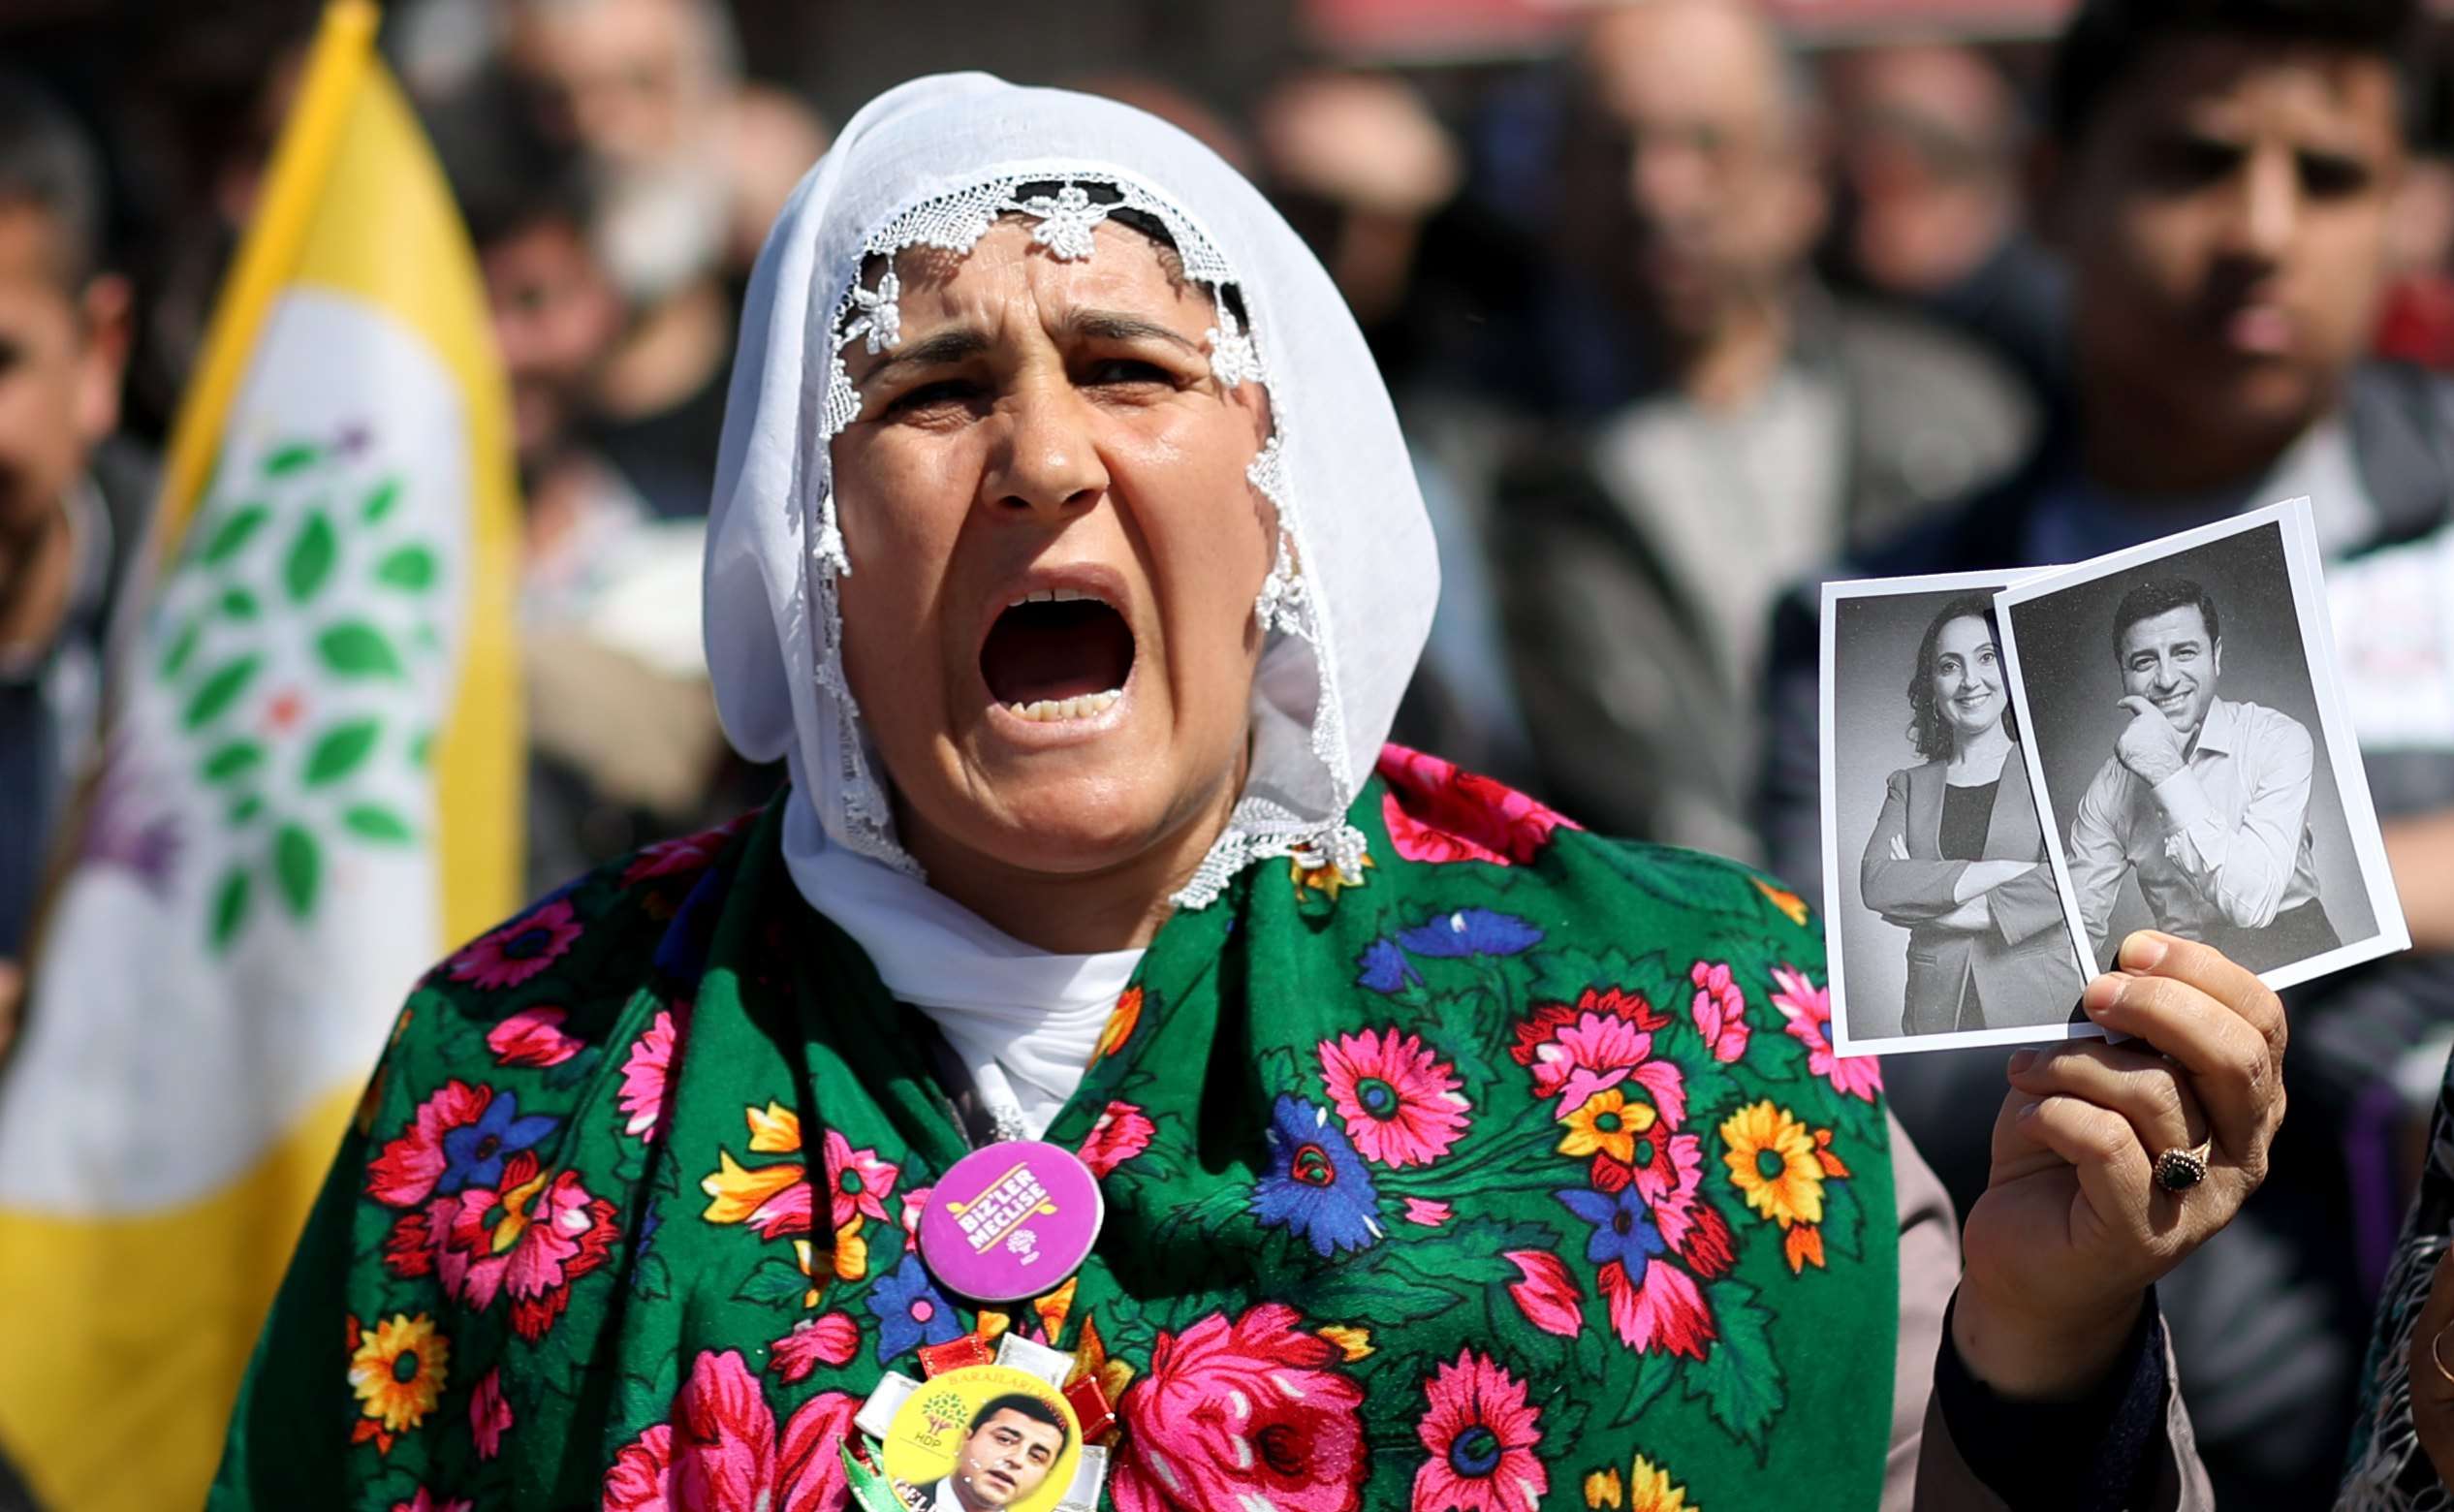 A supporter of the pro-Kurdish People’s Democratic Party holds pictures of party co-leaders who were arrested as part of a terror investigation, during a “Vote No” rally in Istanbul on April 13. Photo: EPA